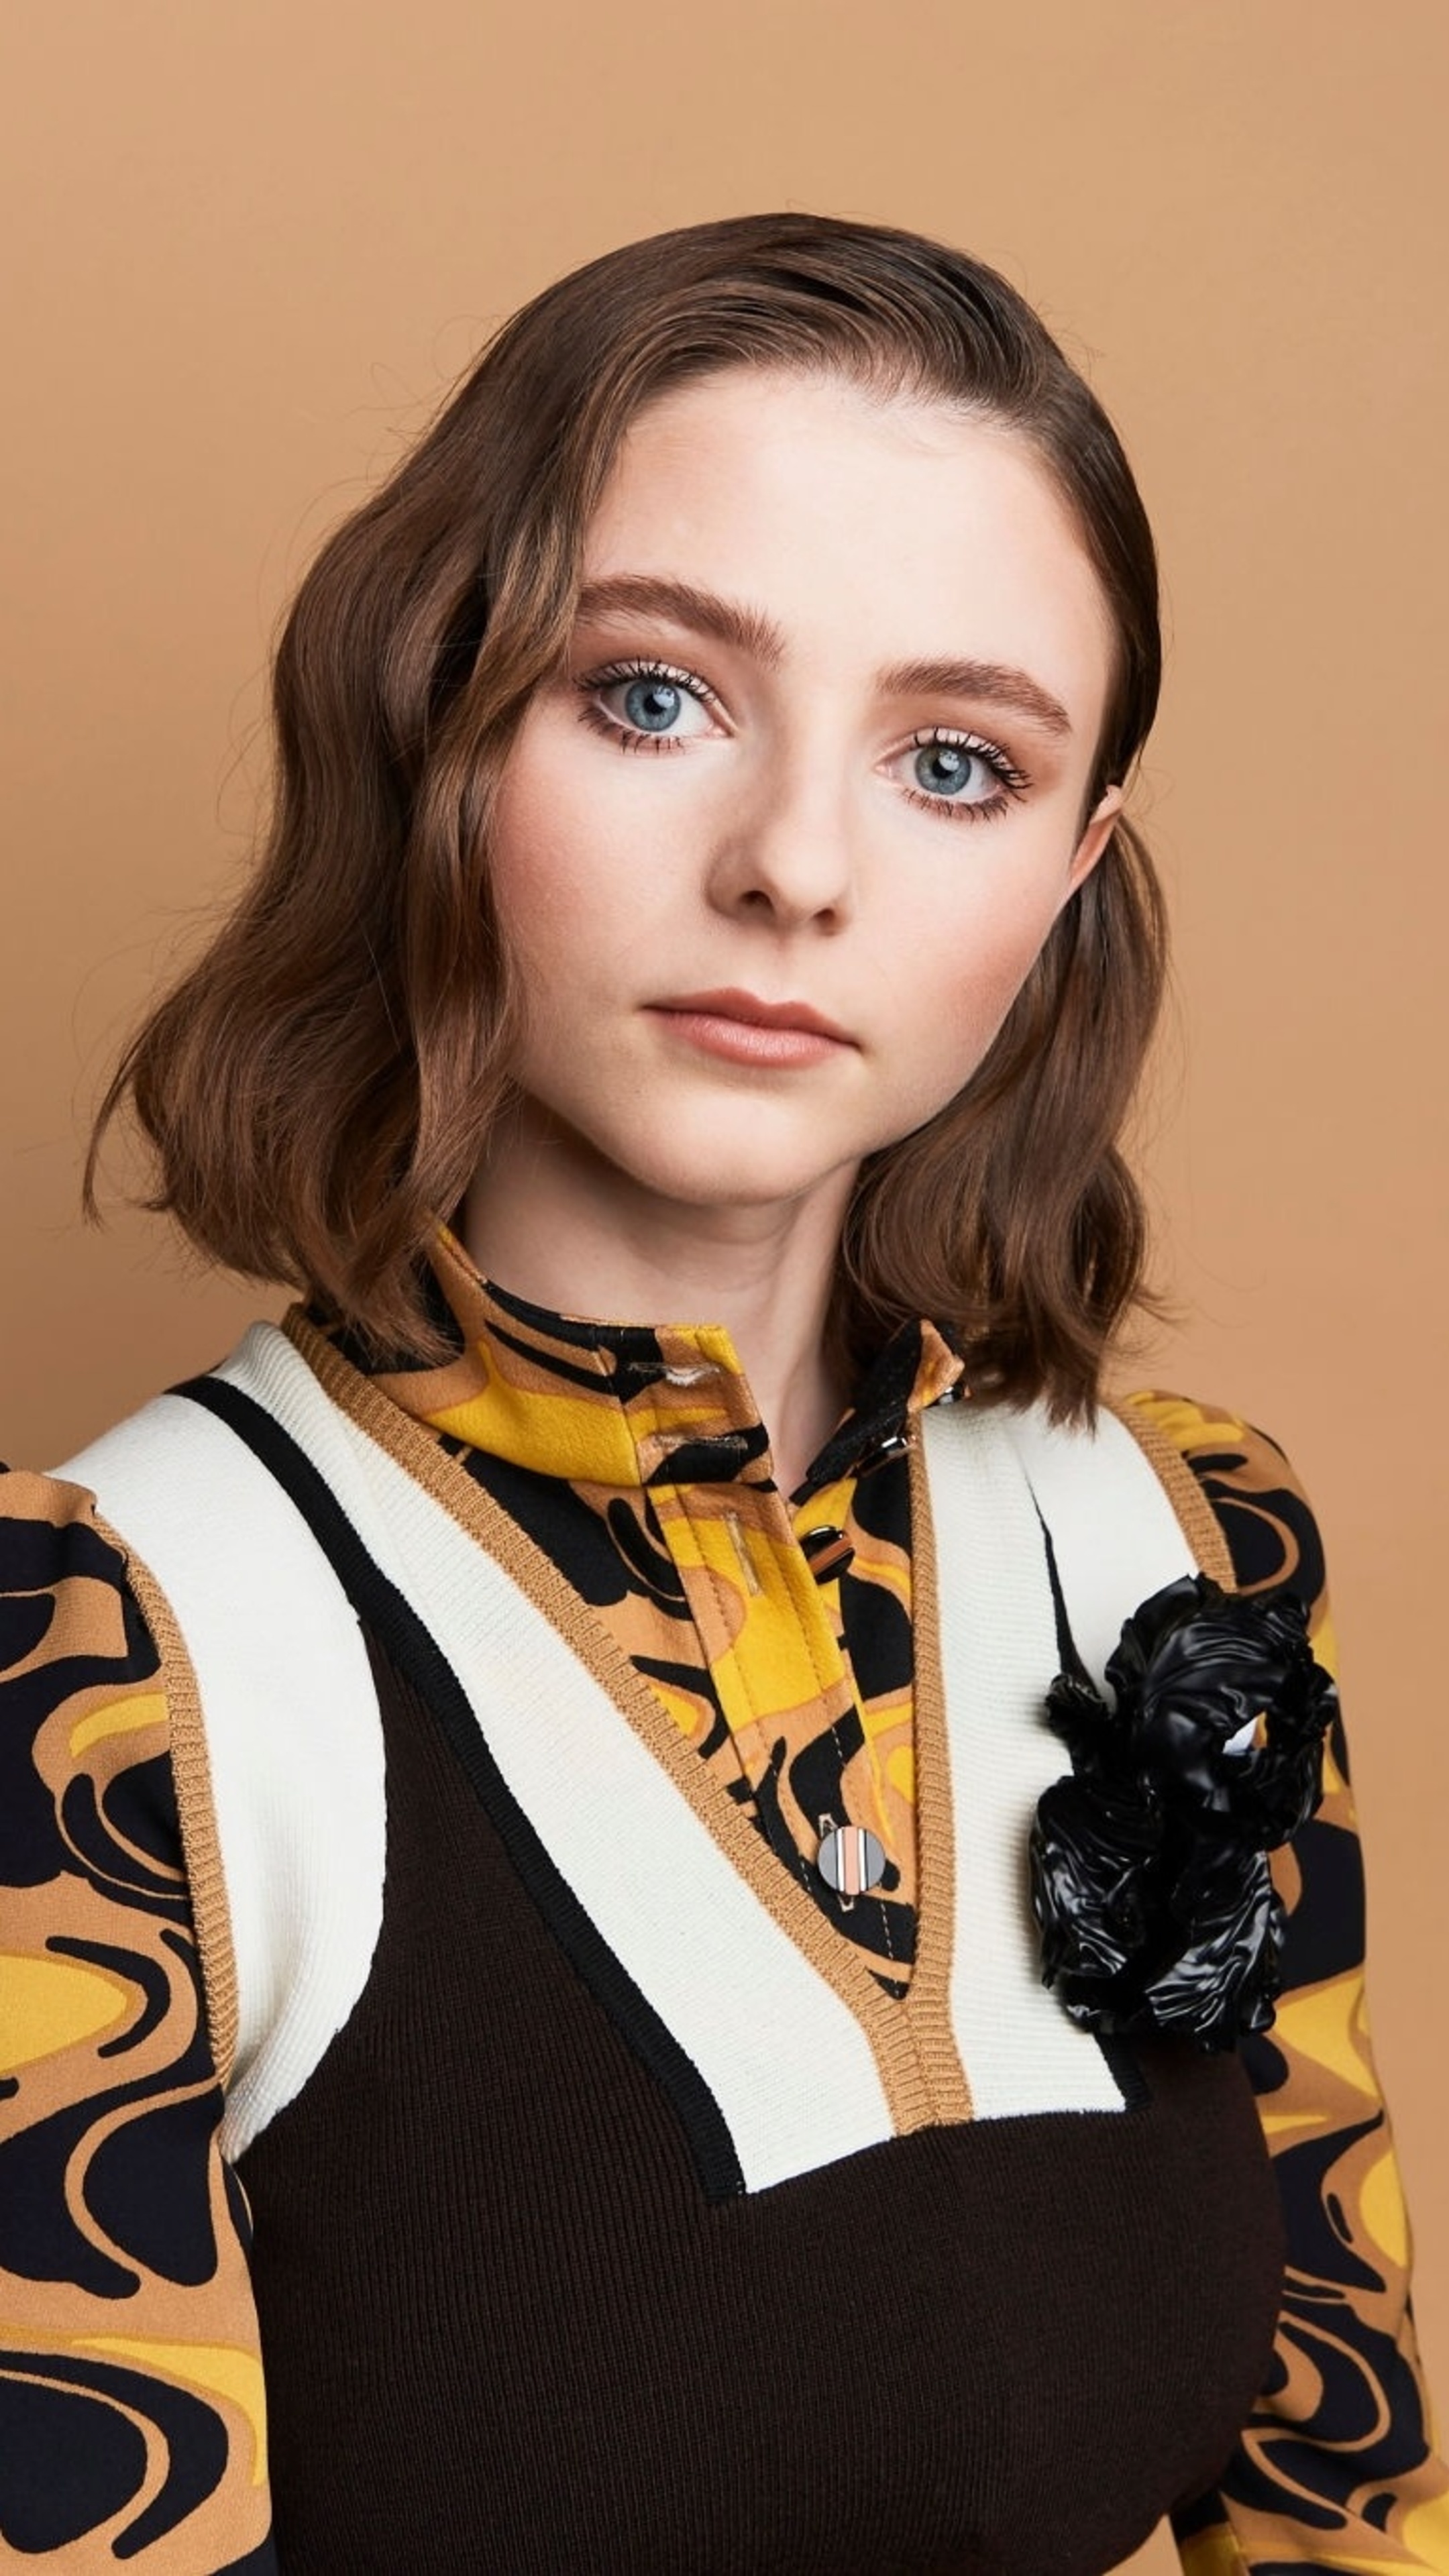 Thomasin McKenzie Sony Xperia wallpapers, HD 4K images, Movies, 2160x3840 4K Handy